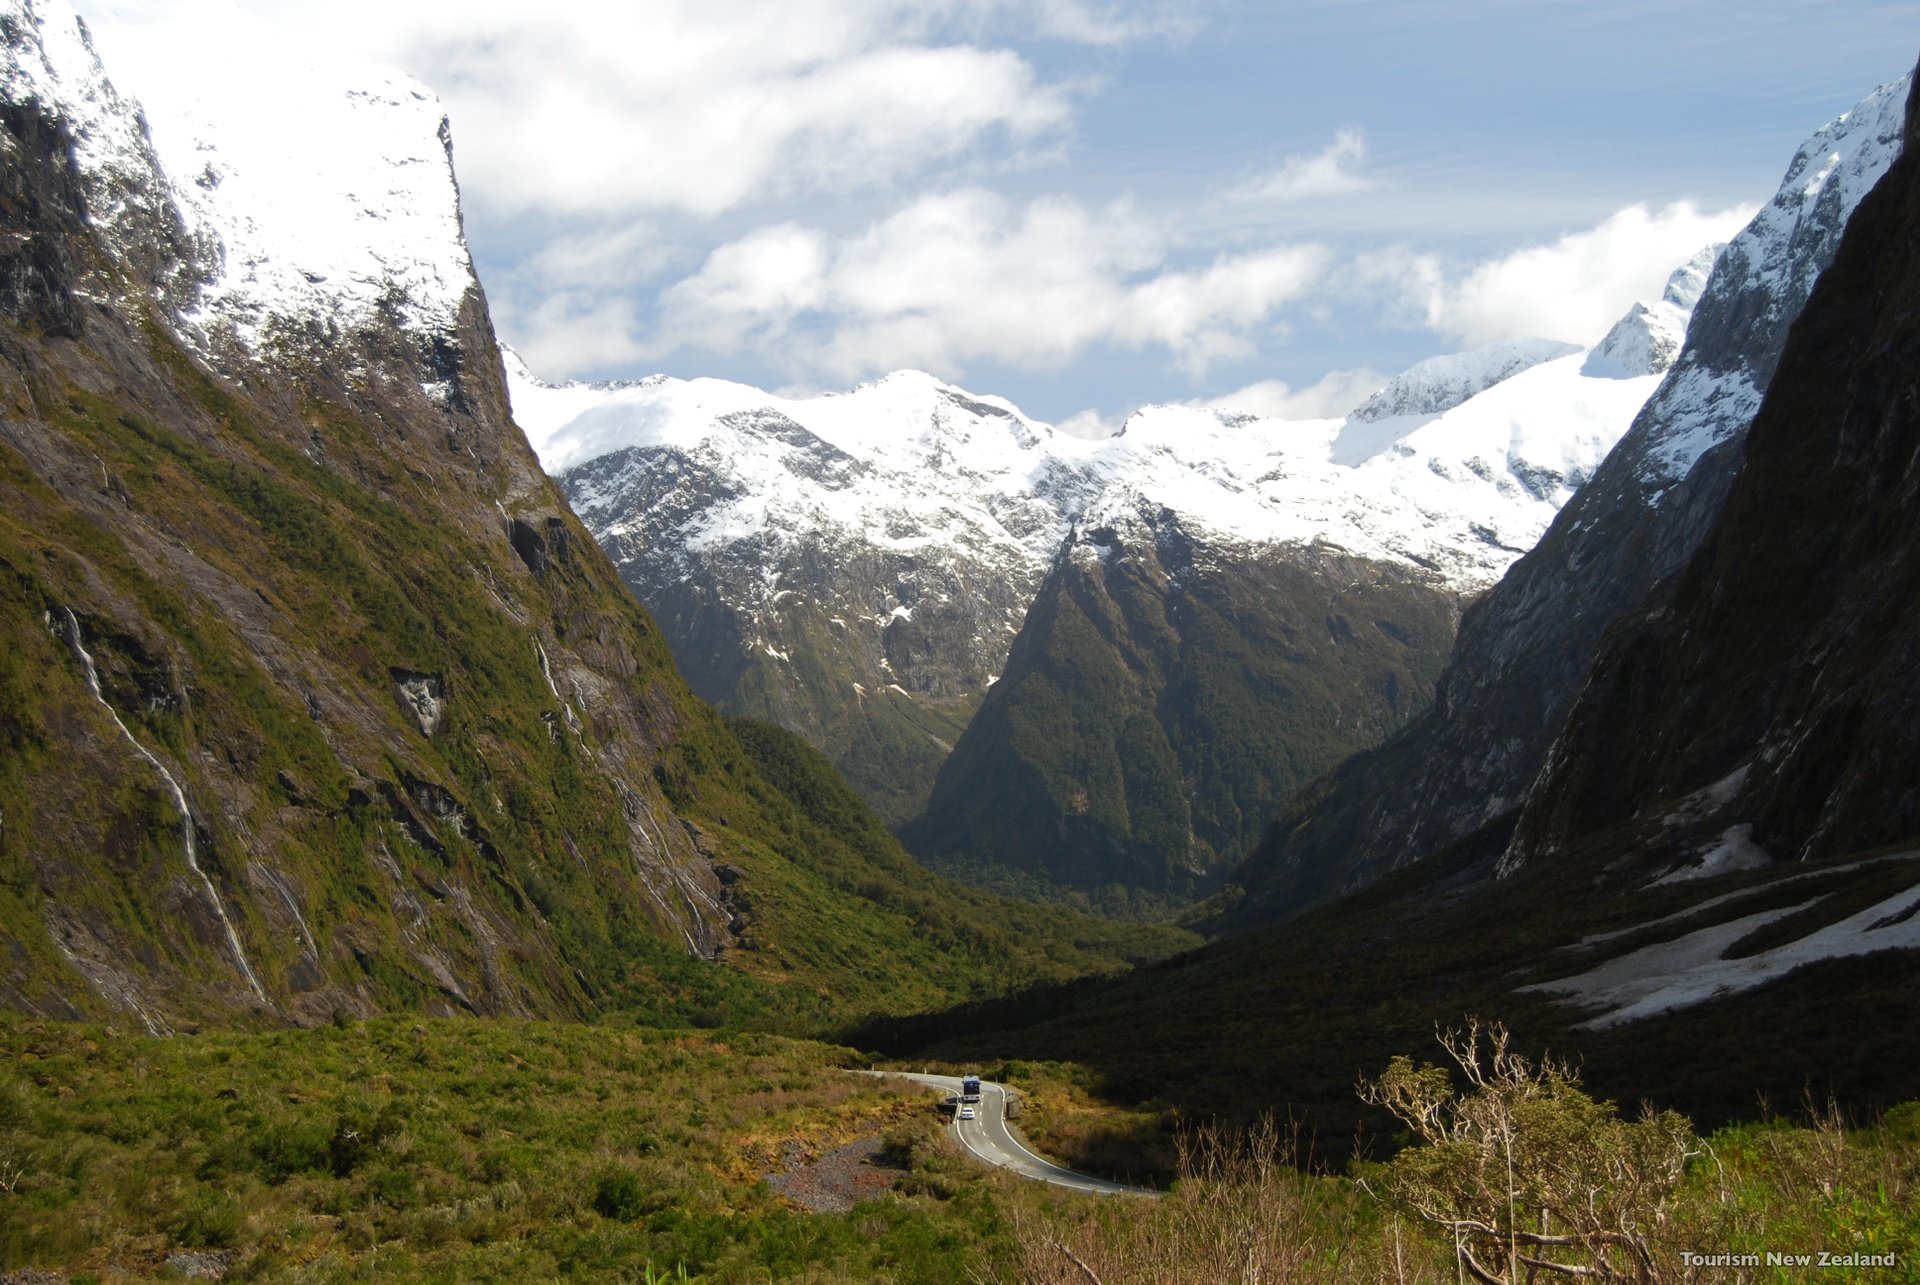 The road to Milford Sound runs through the spectacular Cleddau Valley. Image courtesy Tourism New Zealand